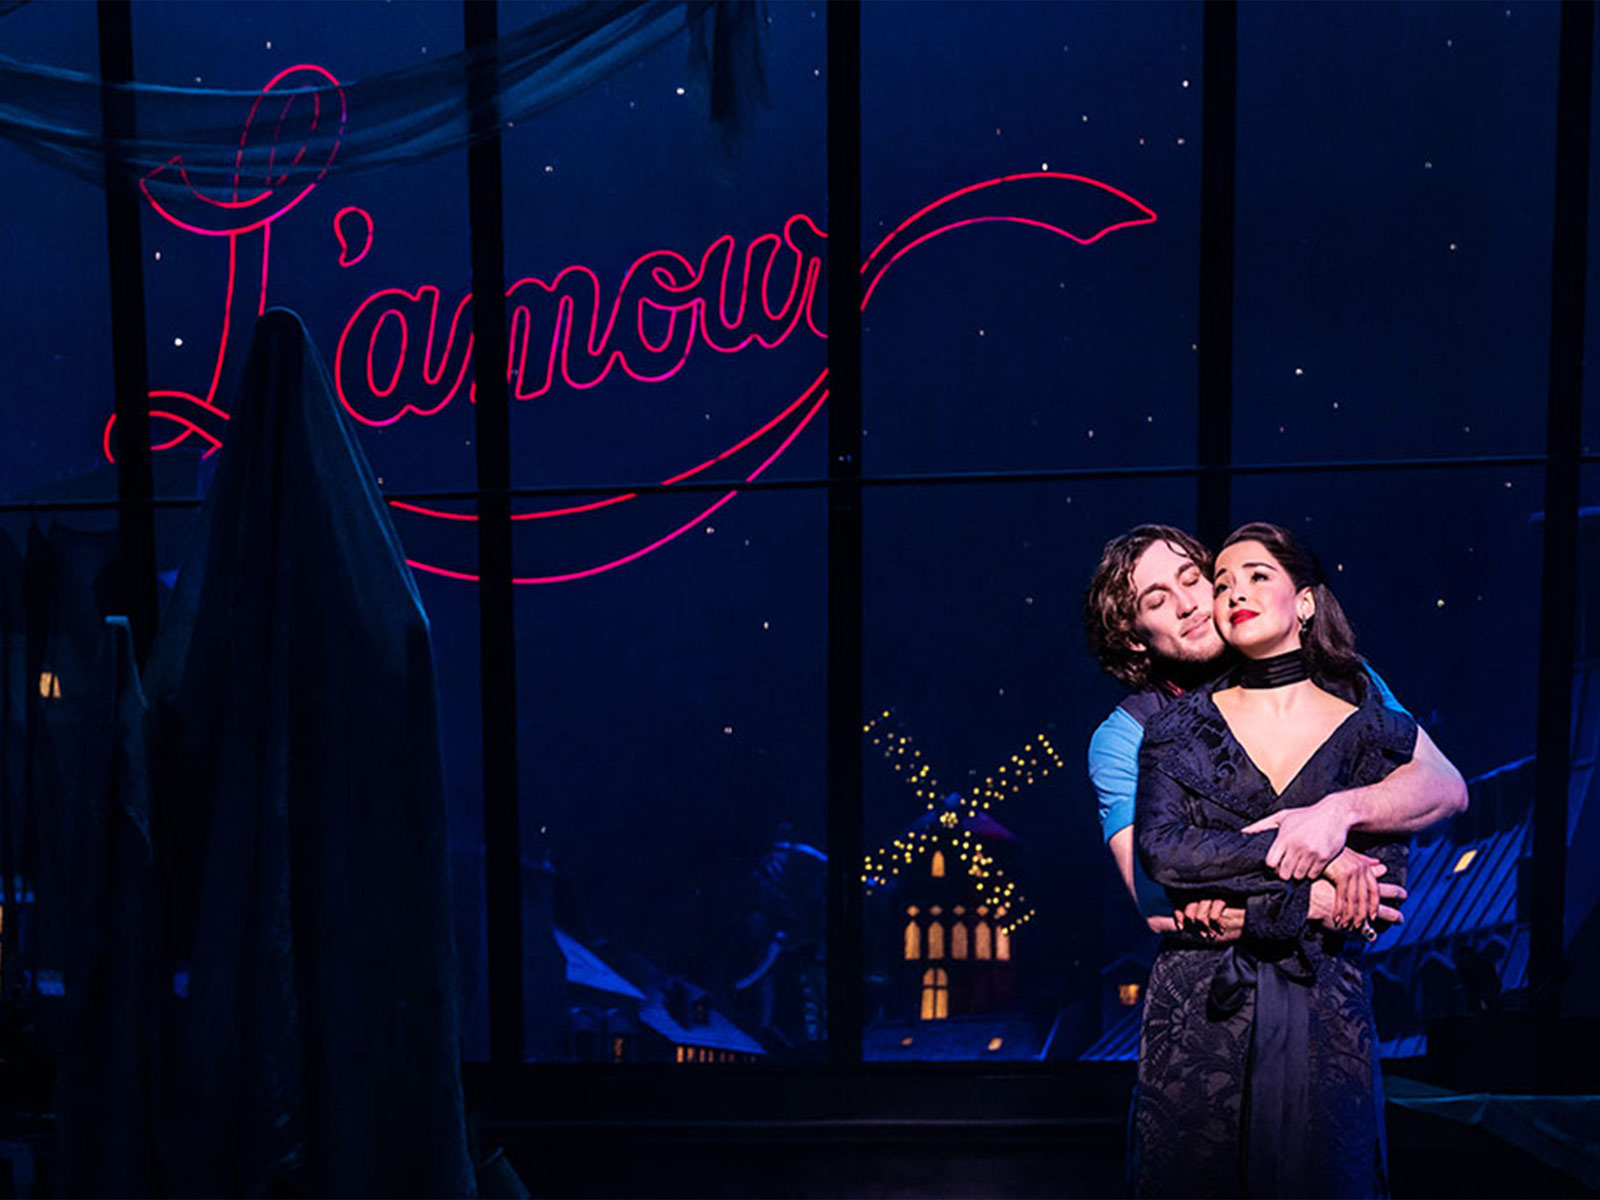 Review: MOULIN ROUGE! THE MUSICAL at Kennedy Center